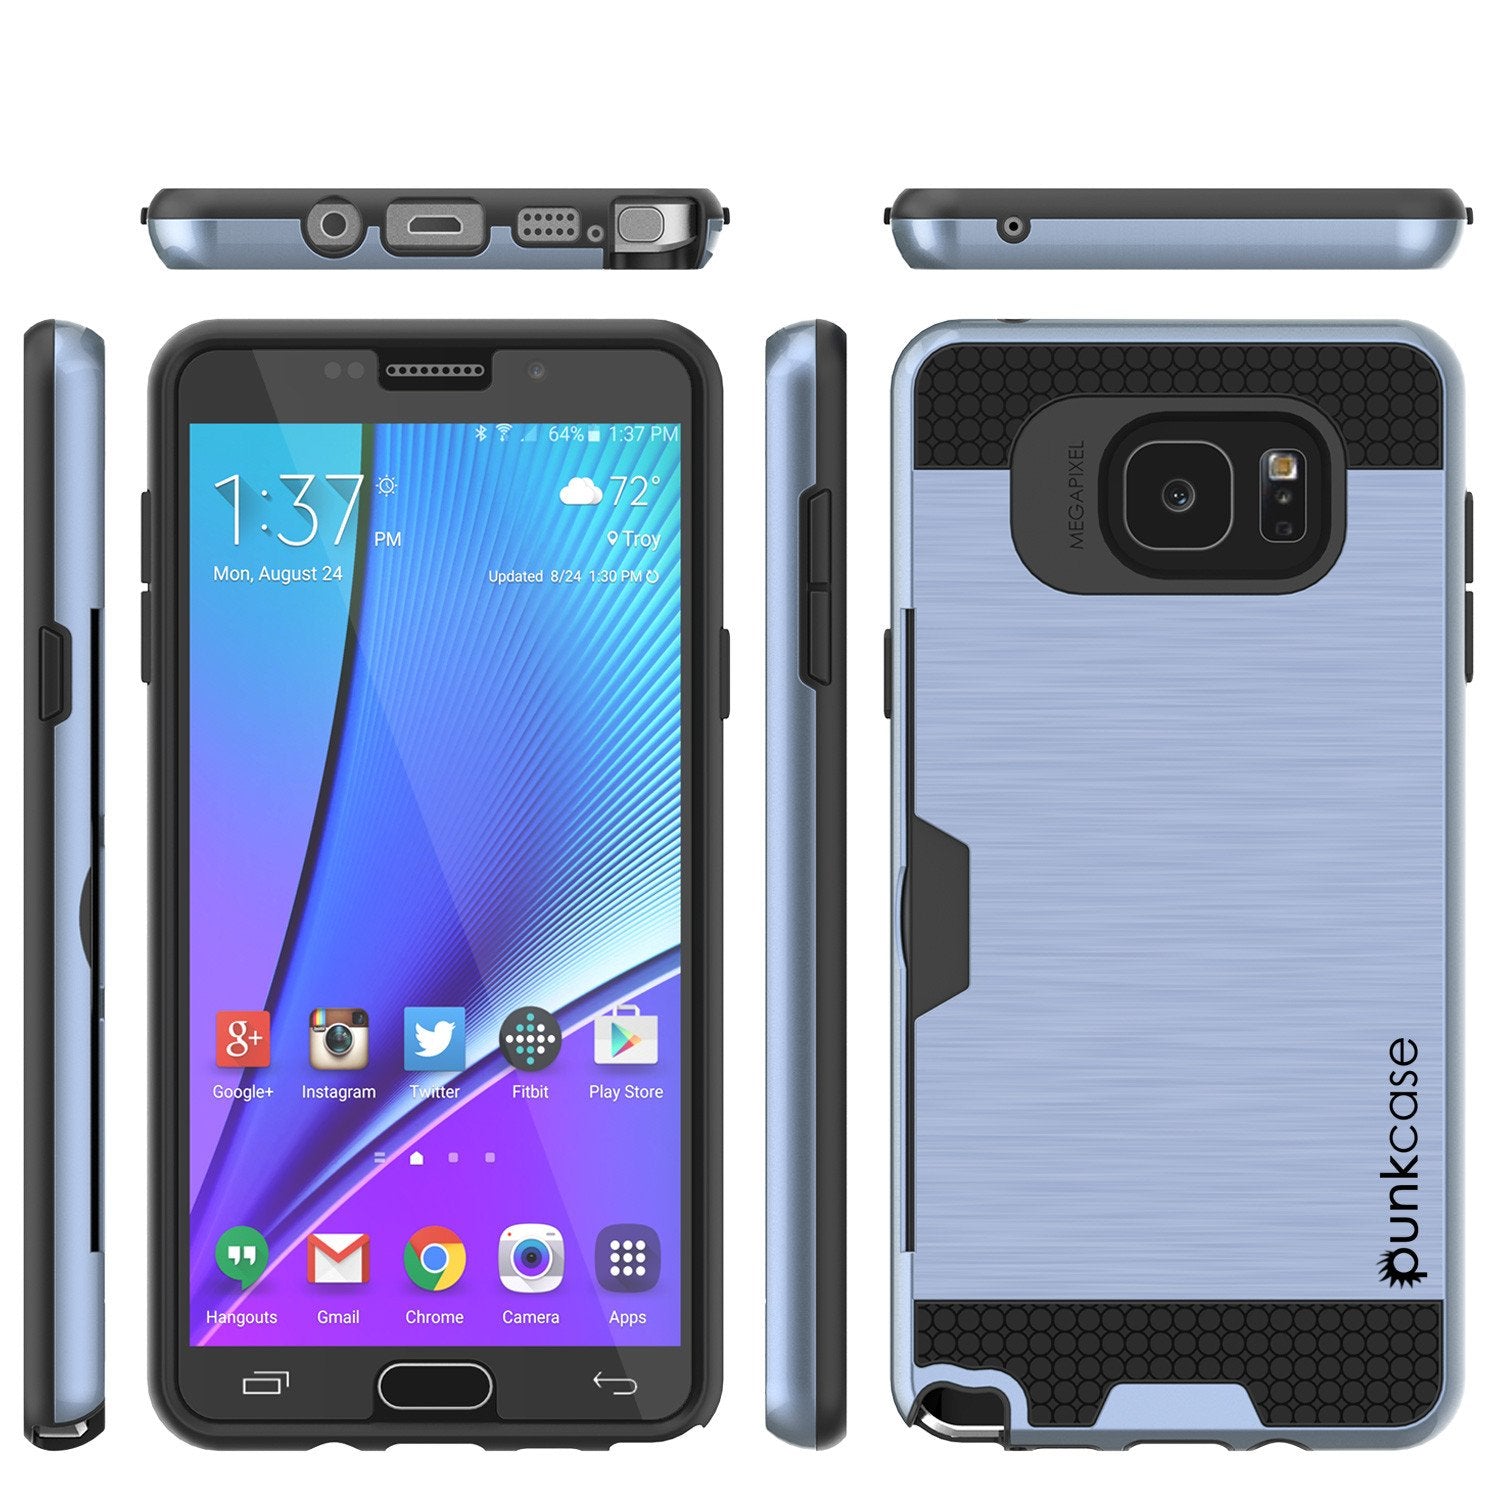 Galaxy Note 5 Case PunkCase SLOT Navy Series Slim Armor Soft Cover Case w/ Tempered Glass